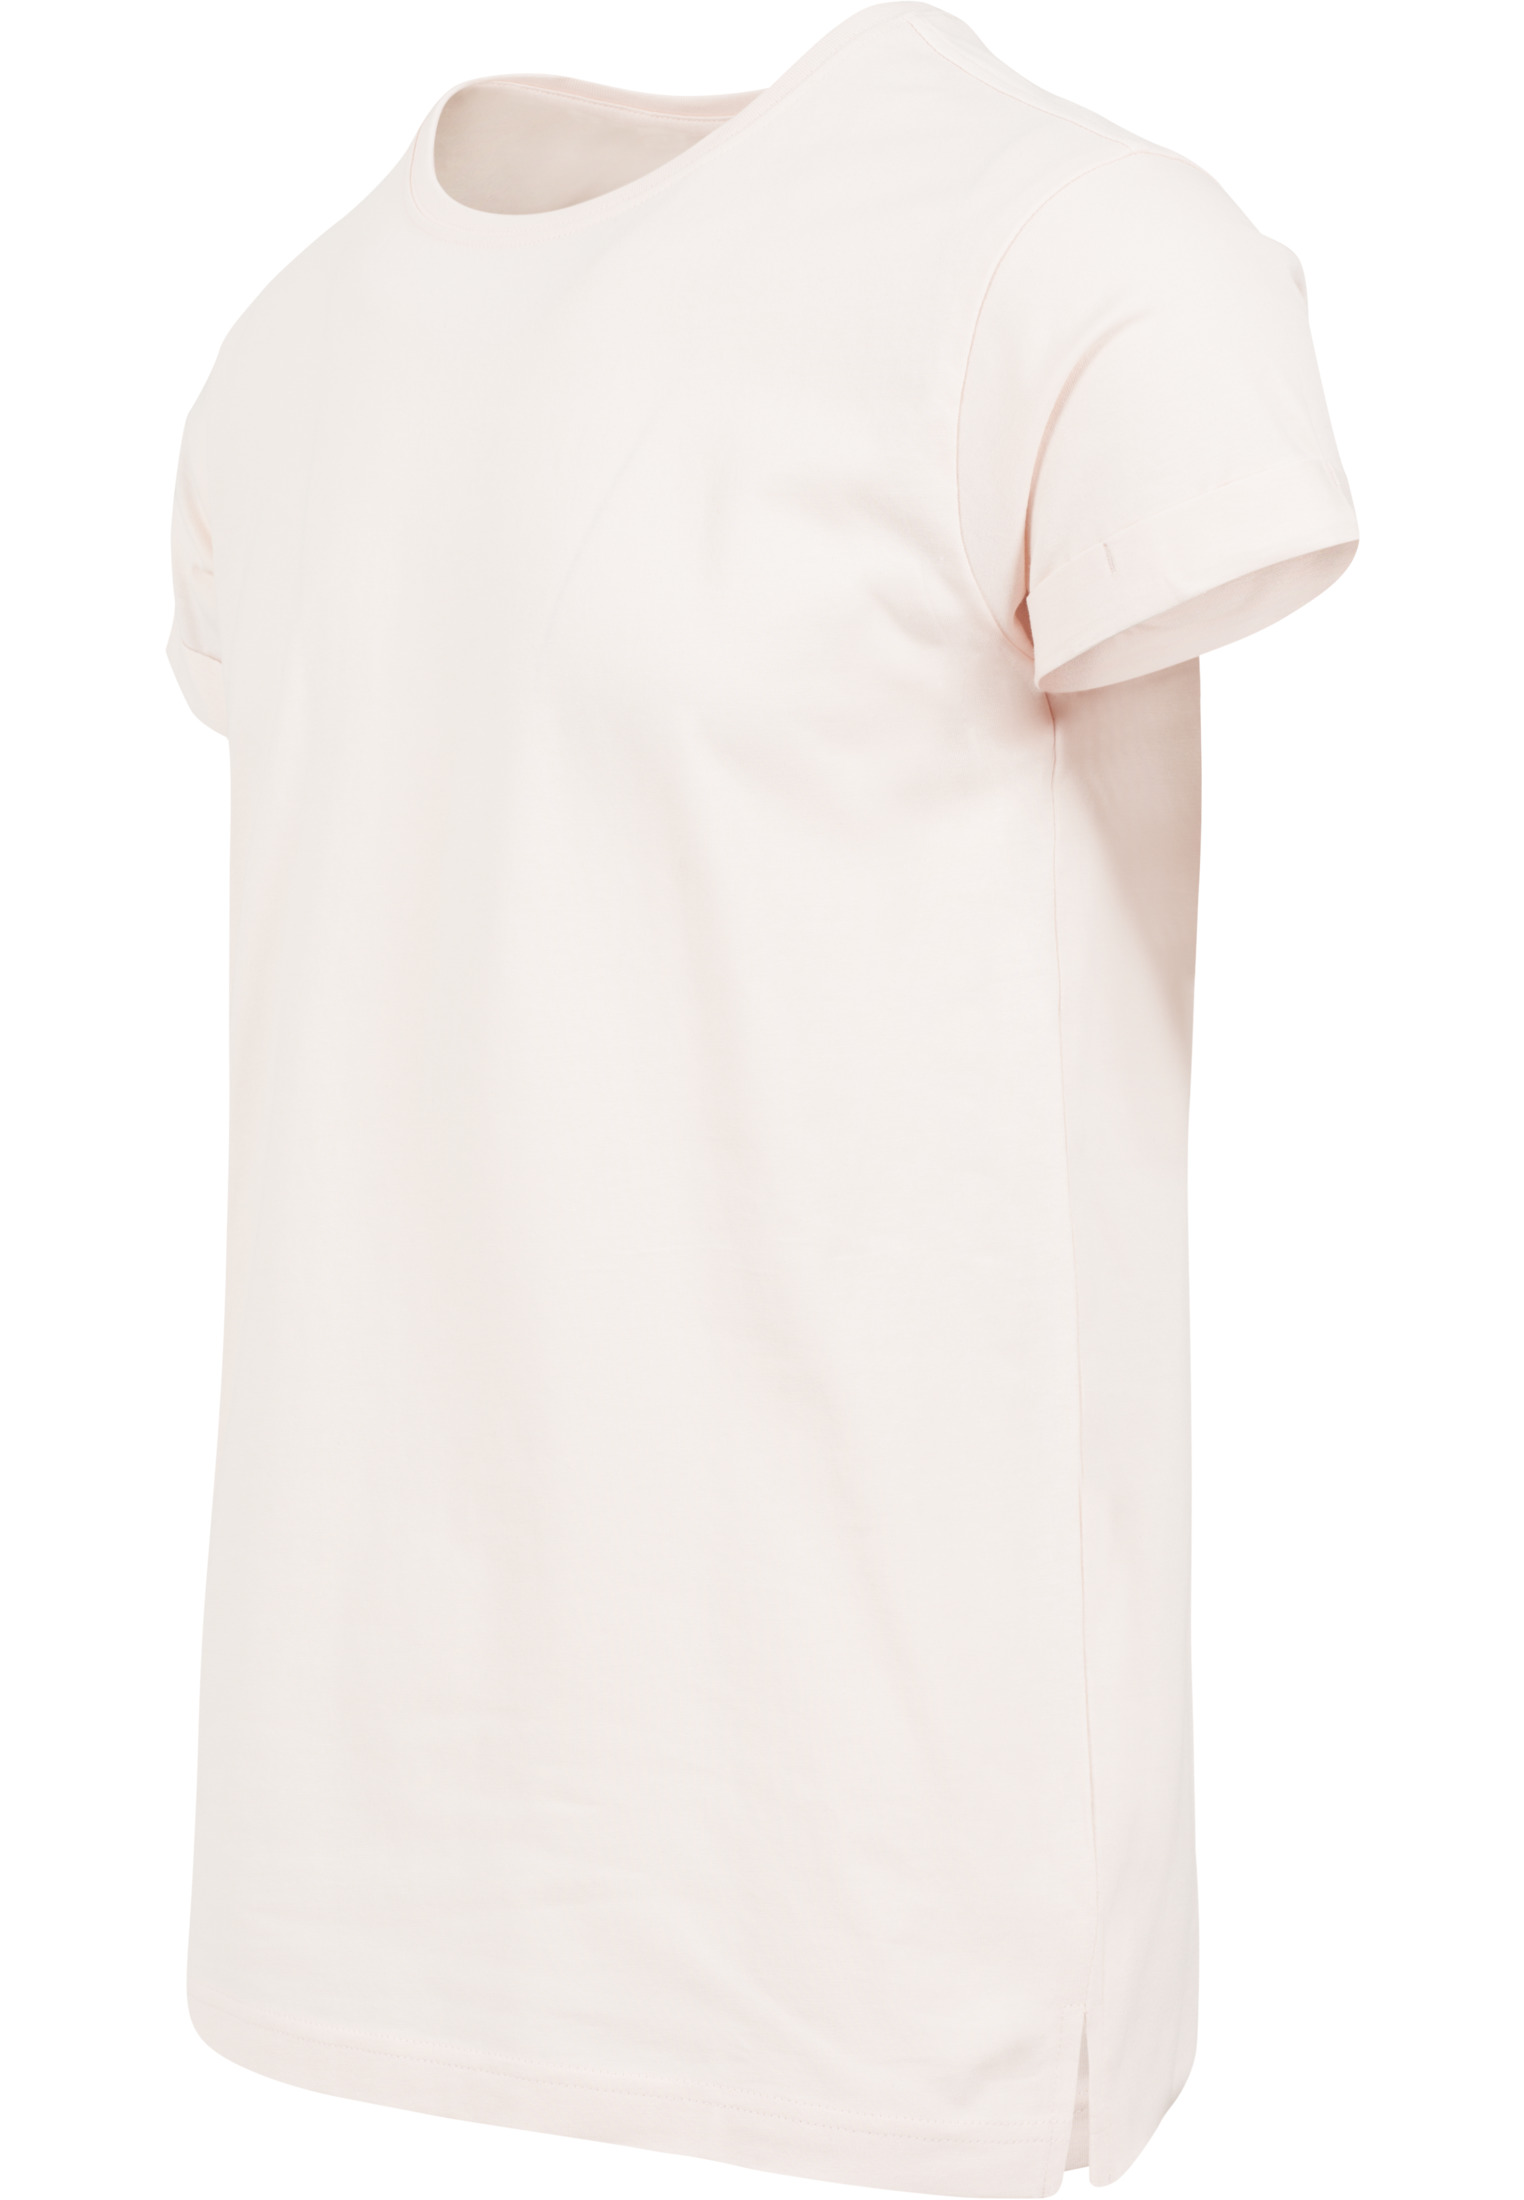 T-Shirts Turnup Tee in Farbe pink